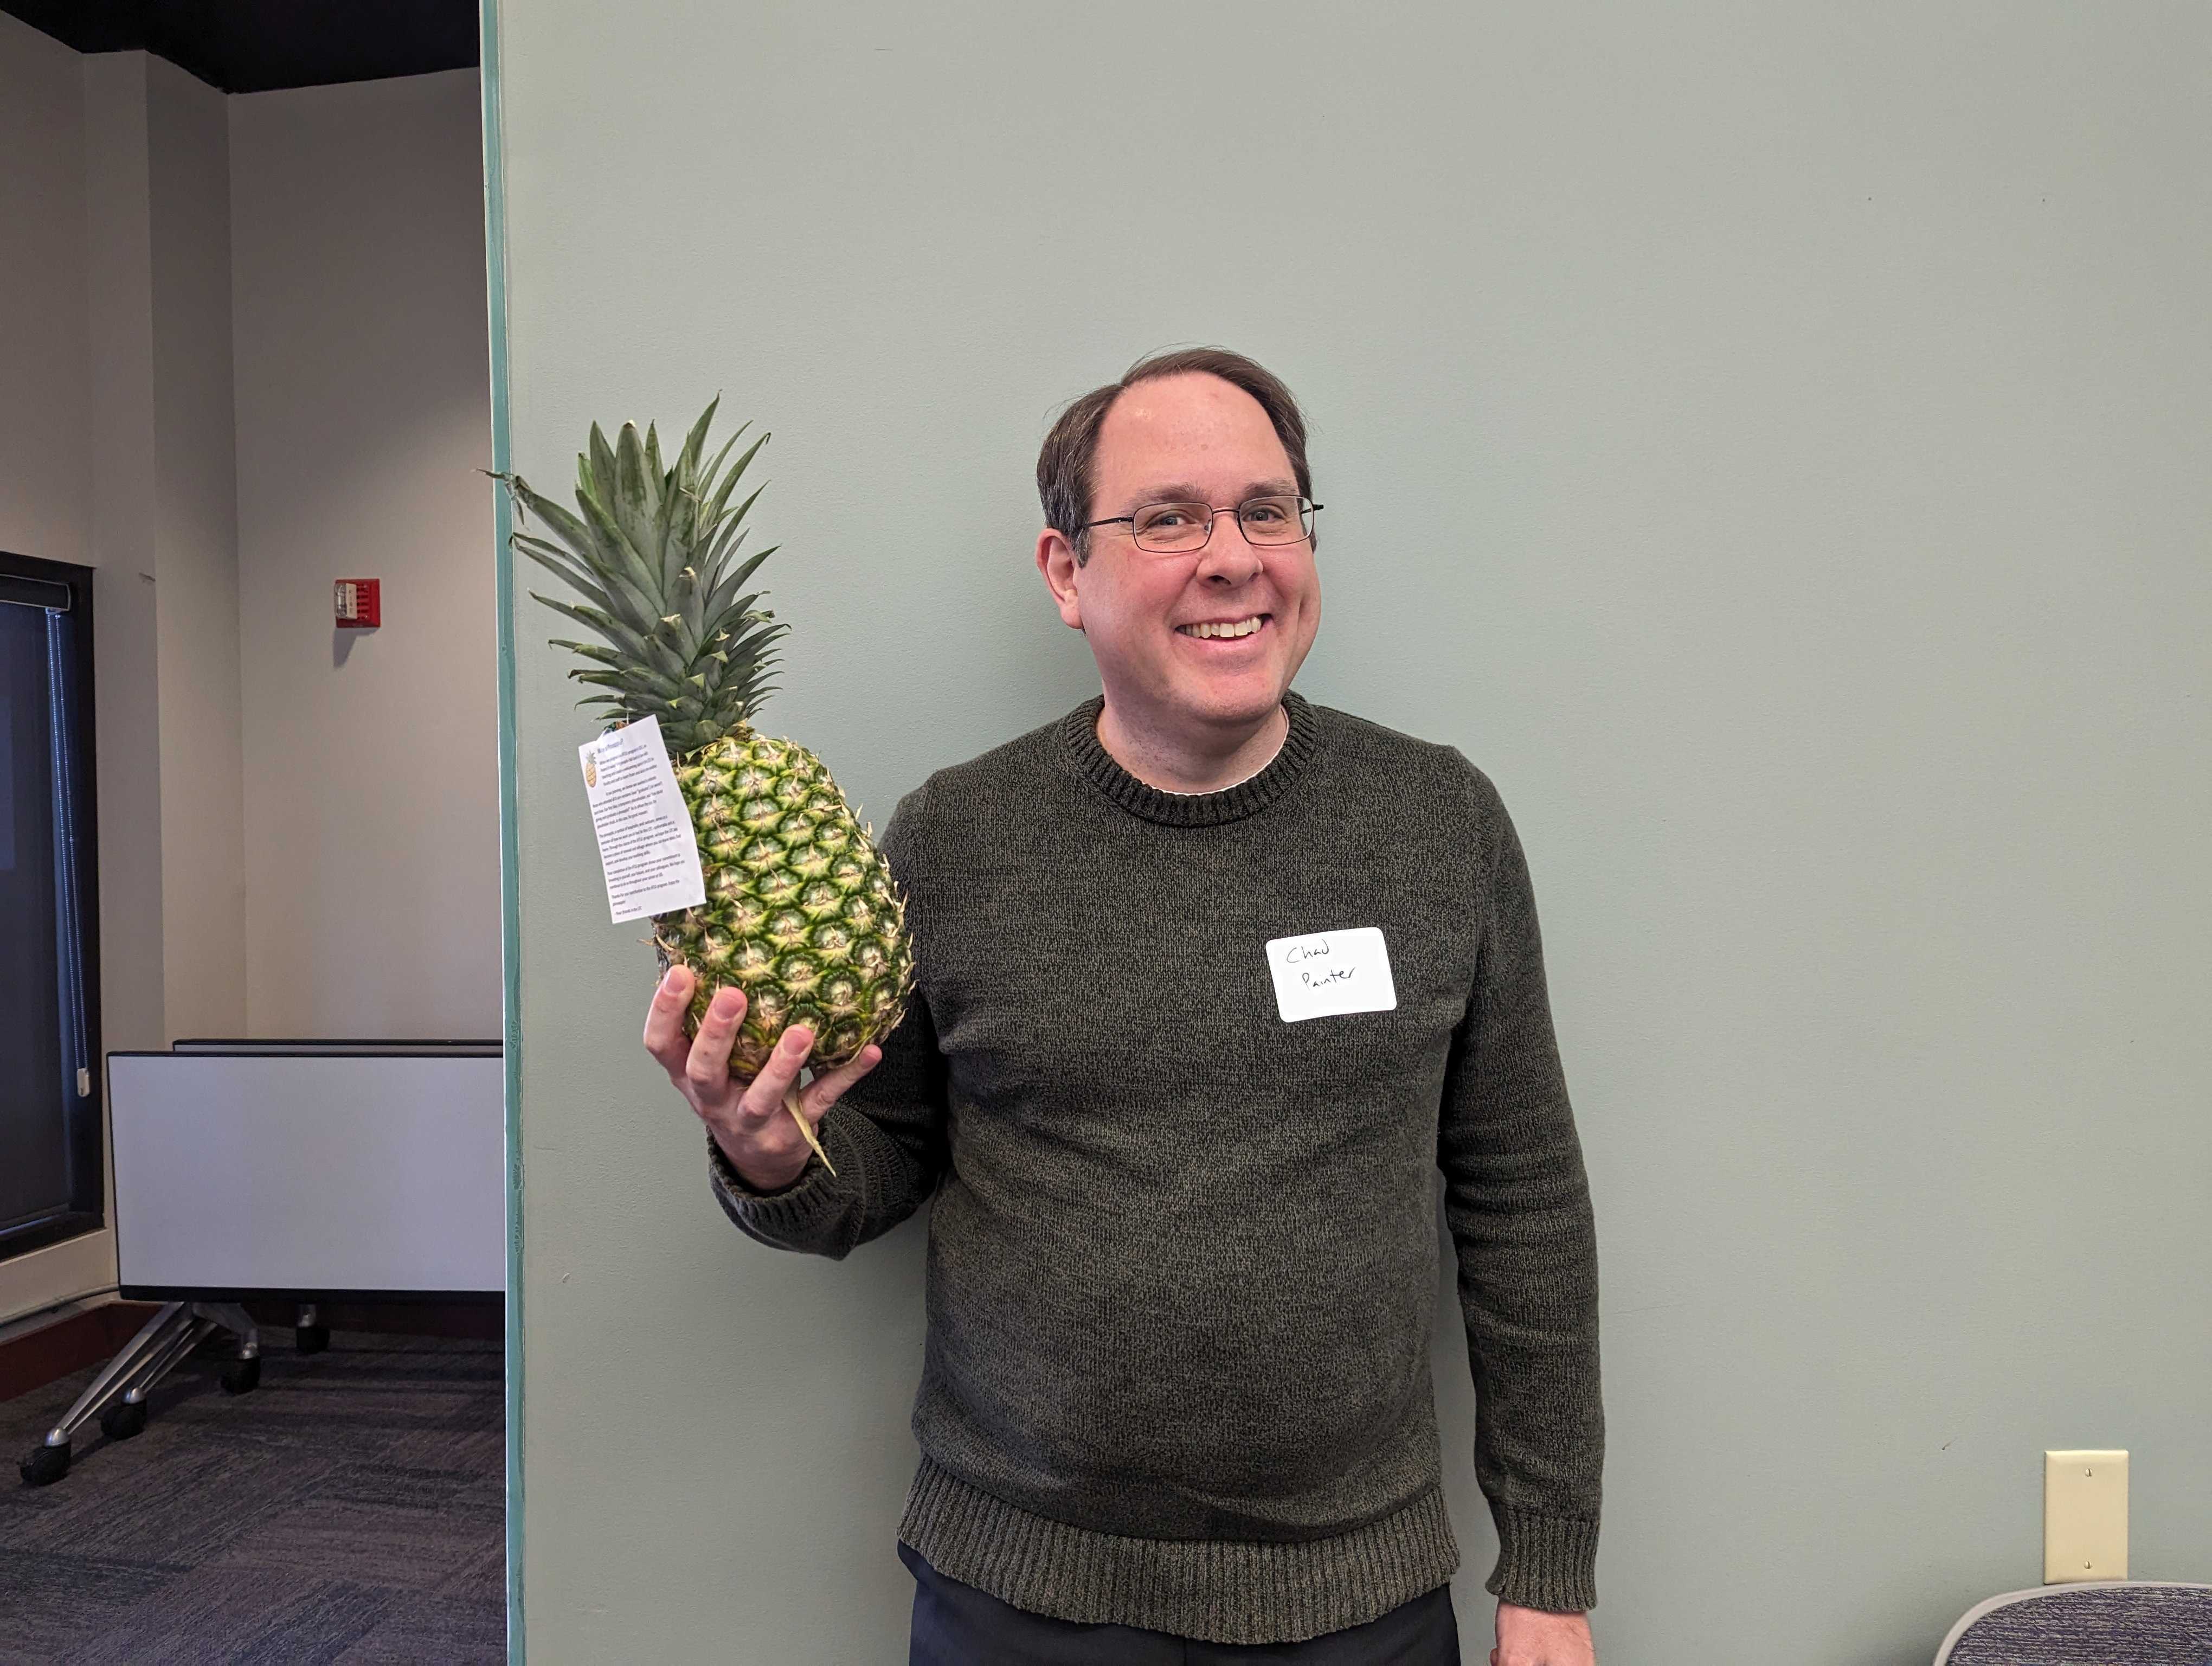 Faculty member Chad Painter poses with a pineapple to signify graduation from ATLS.